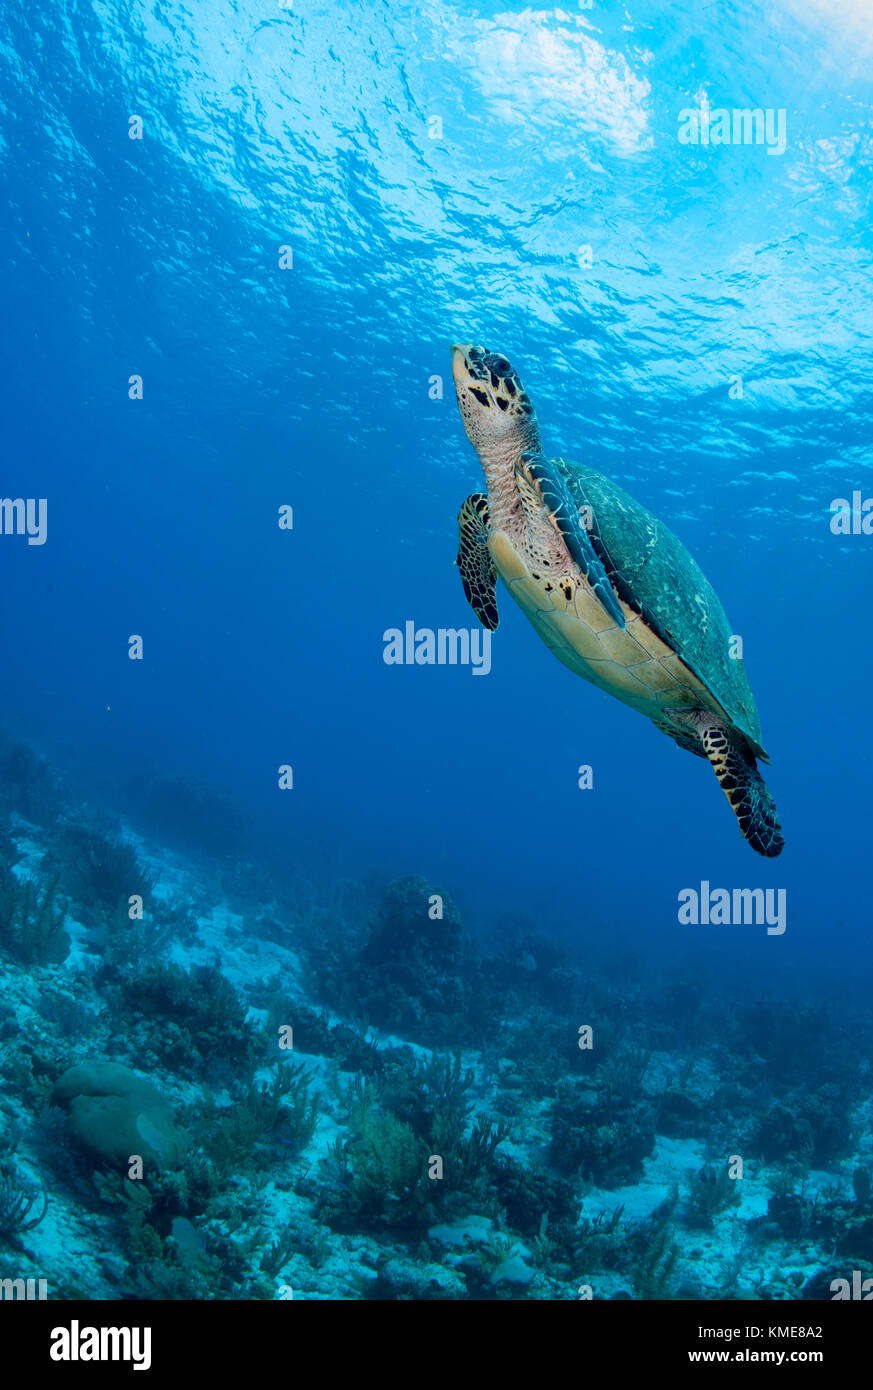 Hawksbill turtle, Glover's Reef Atoll Stock Photo